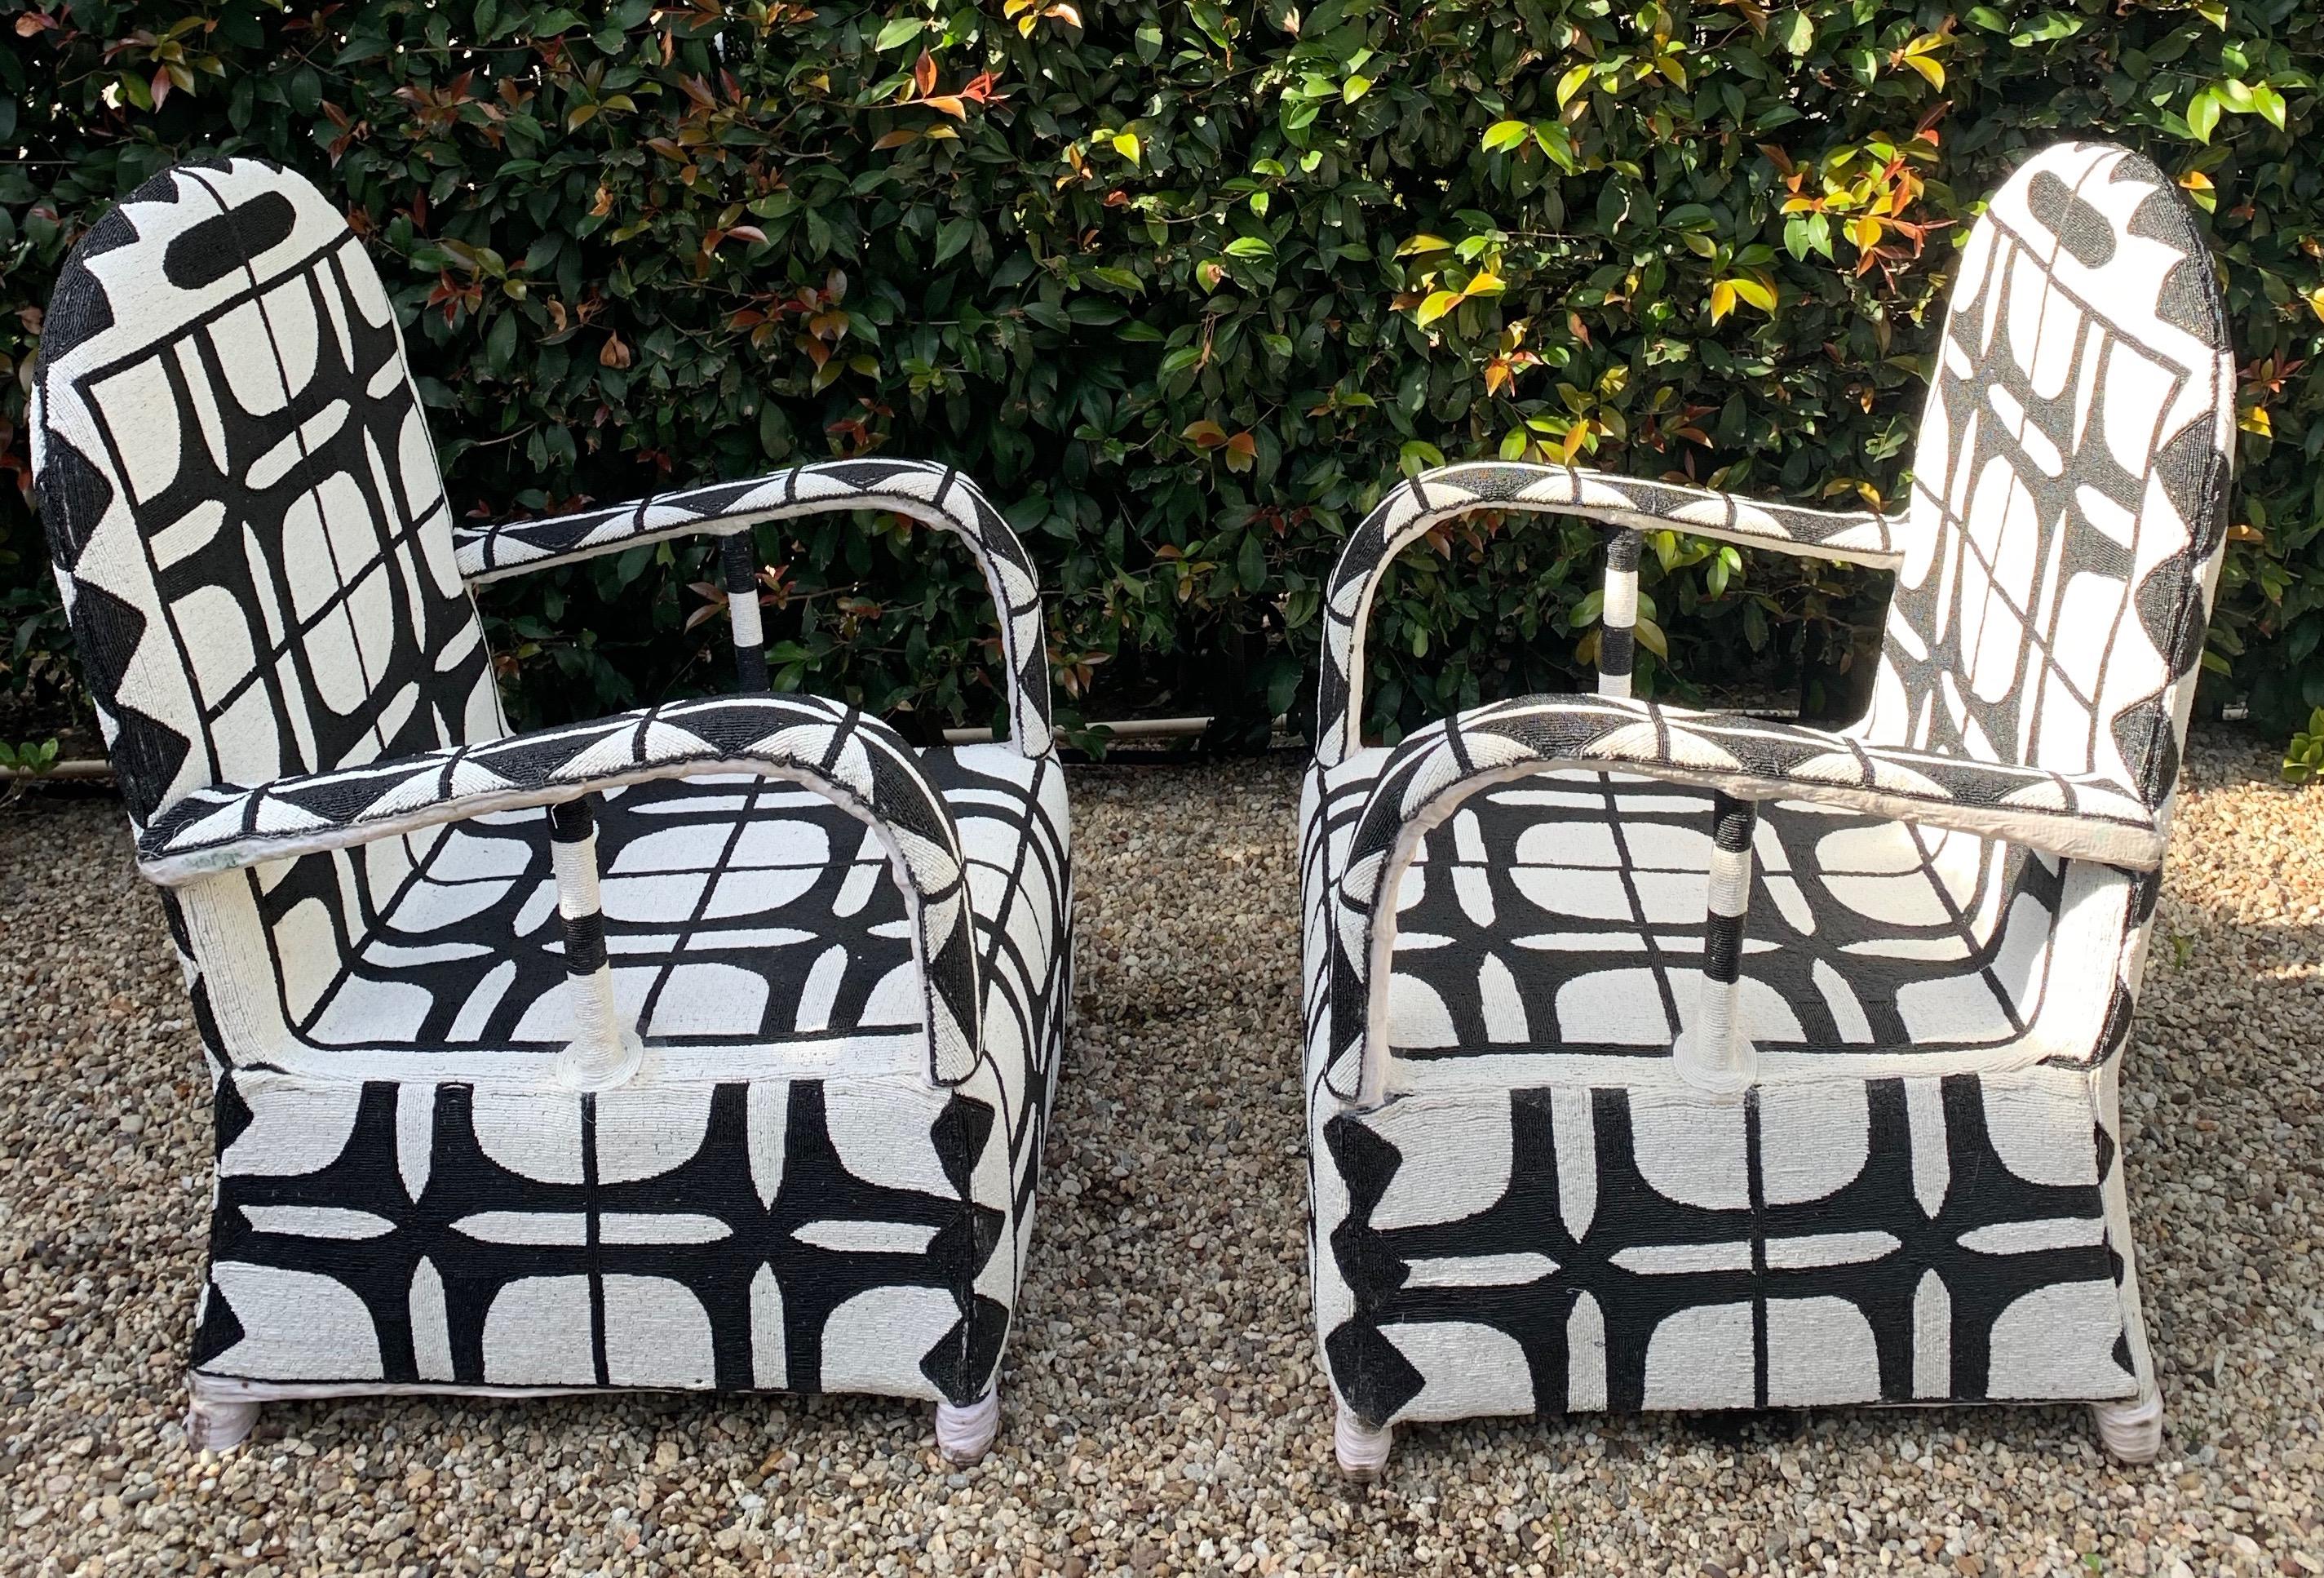 A Pair of handmade / beaded ceremonial Chairs. The chairs, made in Nigeria are custom and made with glass black and white beads to form the exquisite and very graphic pattern. A wonderful pair perfectly represented in many decors, modern or